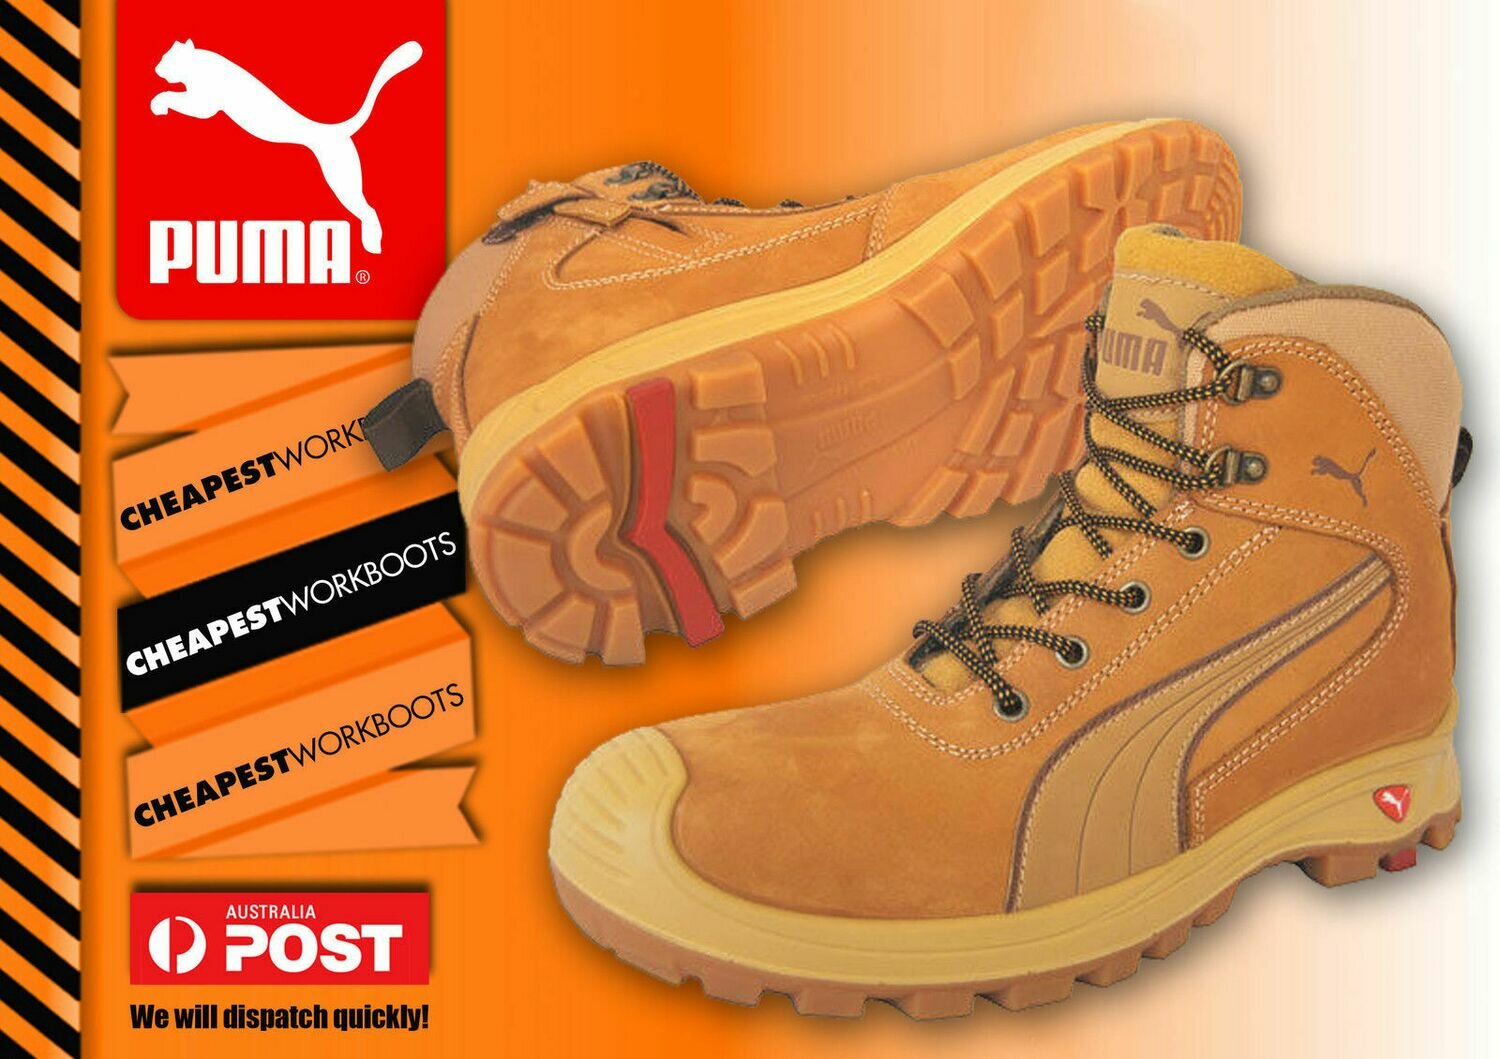 Puma Nullarbor 630367 Work Boots Composite Toe Safety Cap Zip-Sider CHEAPEST, Size: 9